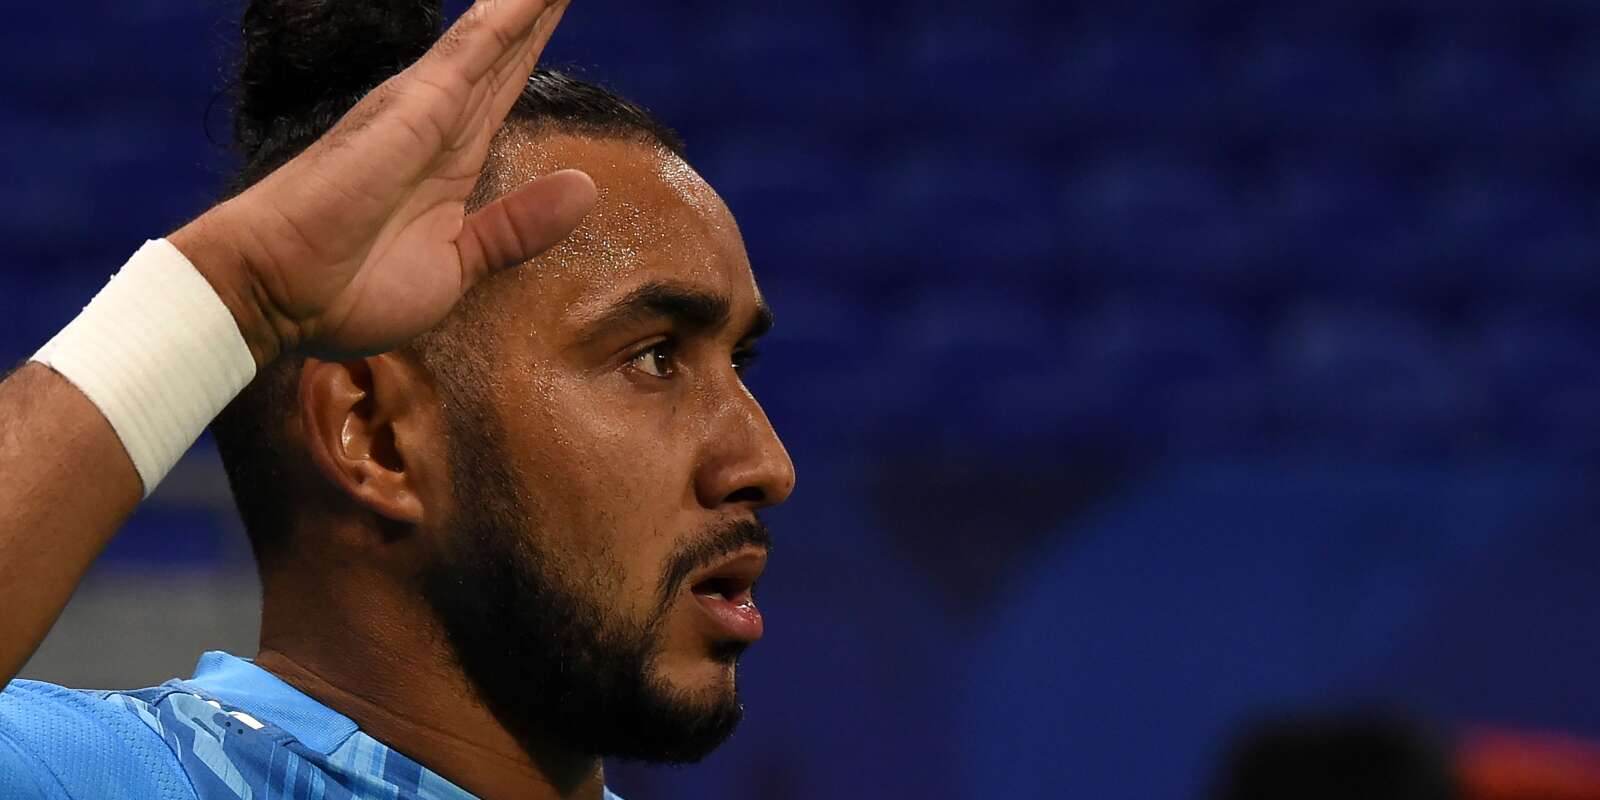 Marseille's French midefielder Dimitri Payet celebrates after scoring during the French L1 football match between Olympique Lyonnais and Olympique de Marseille at the Groupama Stadium in Decines-Charpieu, near Lyon, central-eastern France on October 4, 2020. / AFP / JEAN-PHILIPPE KSIAZEK